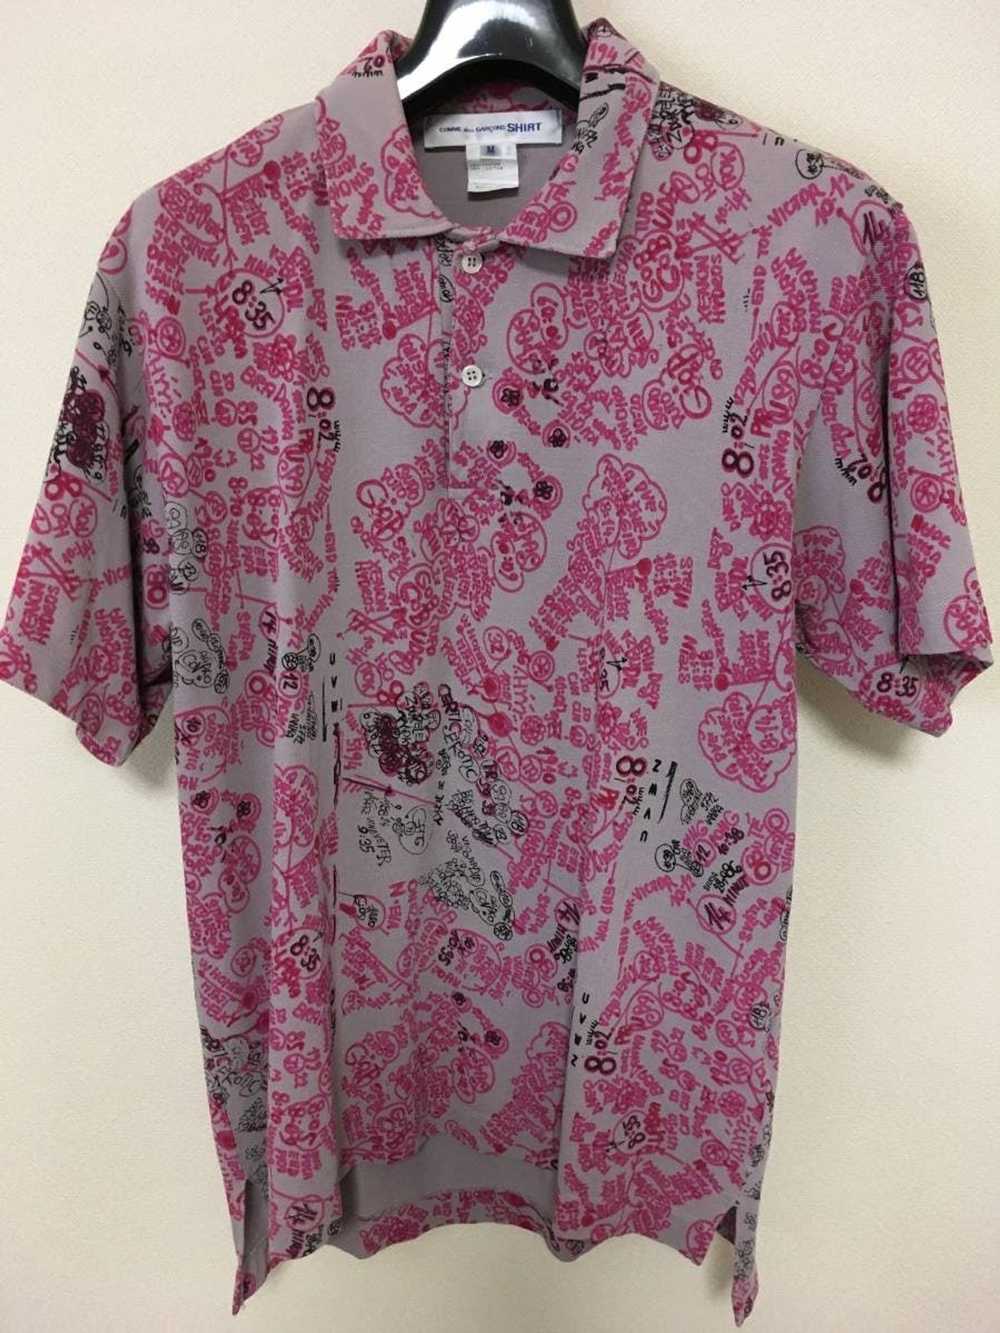 Comme des Garcons Printed Polo Shirt - image 1